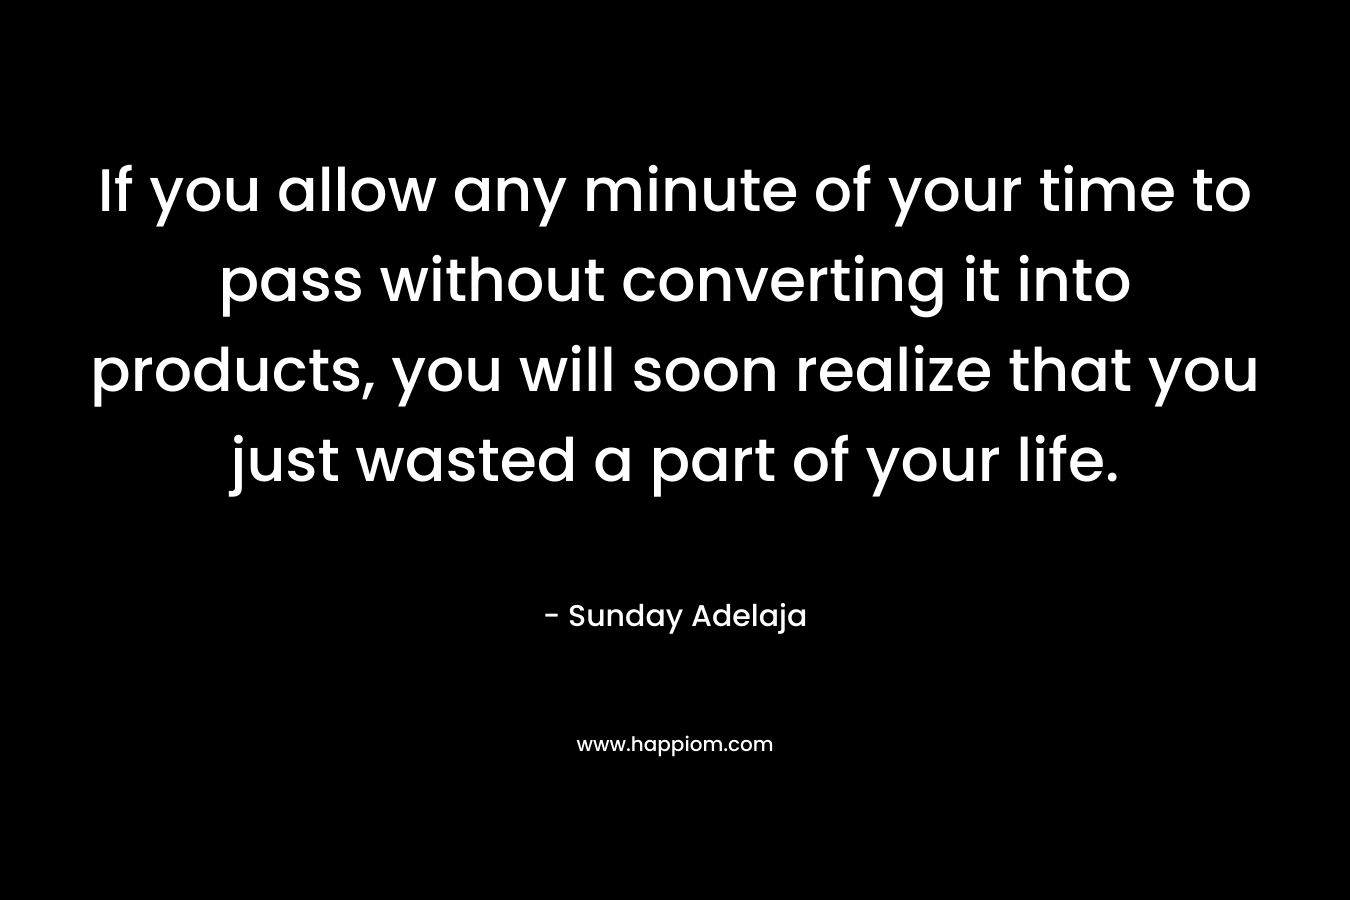 If you allow any minute of your time to pass without converting it into products, you will soon realize that you just wasted a part of your life.